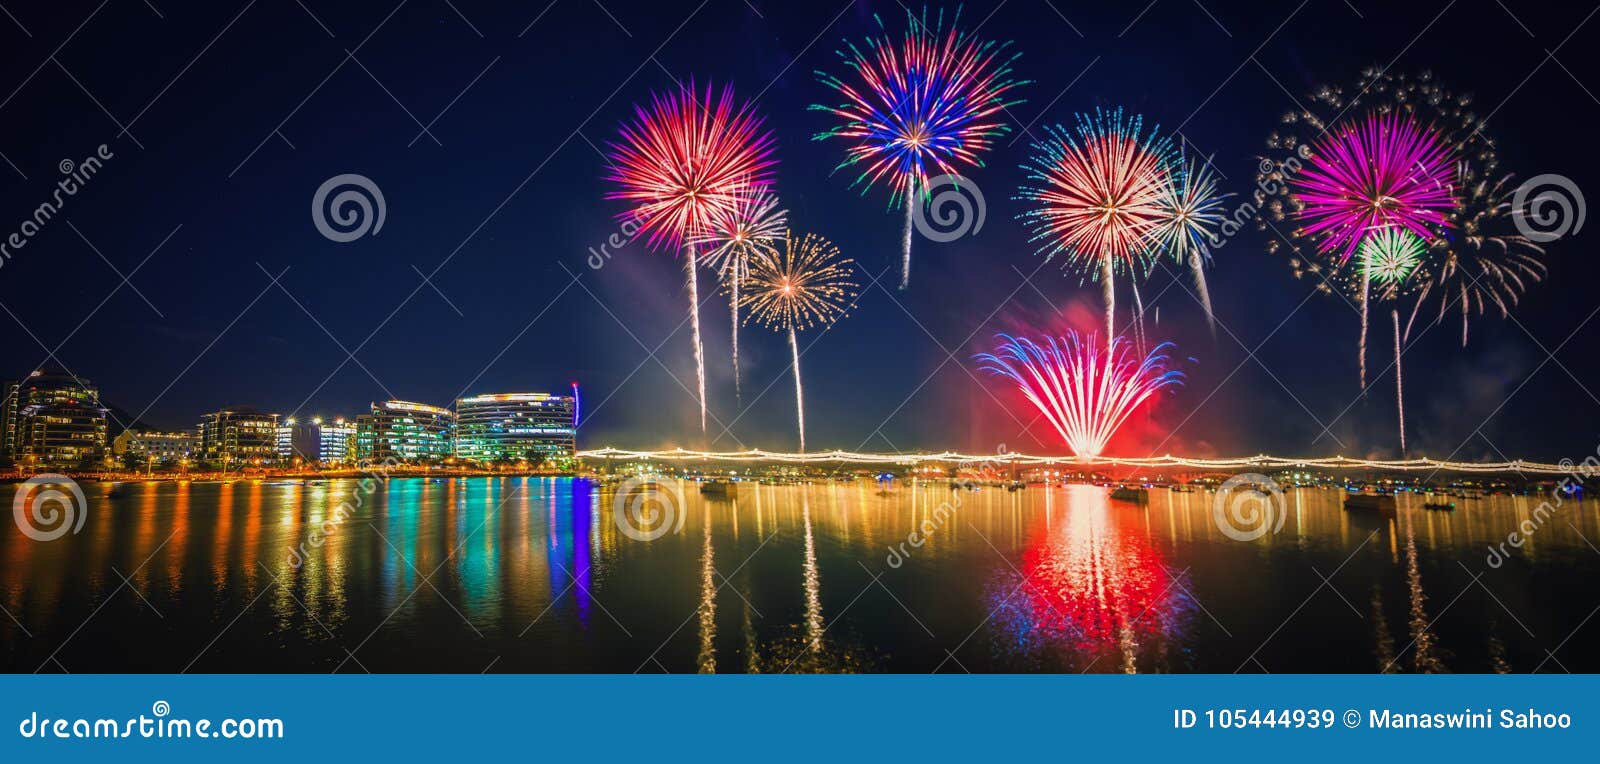 Colorful Firework Over Tempe Lake Stock Image Image of dramatic